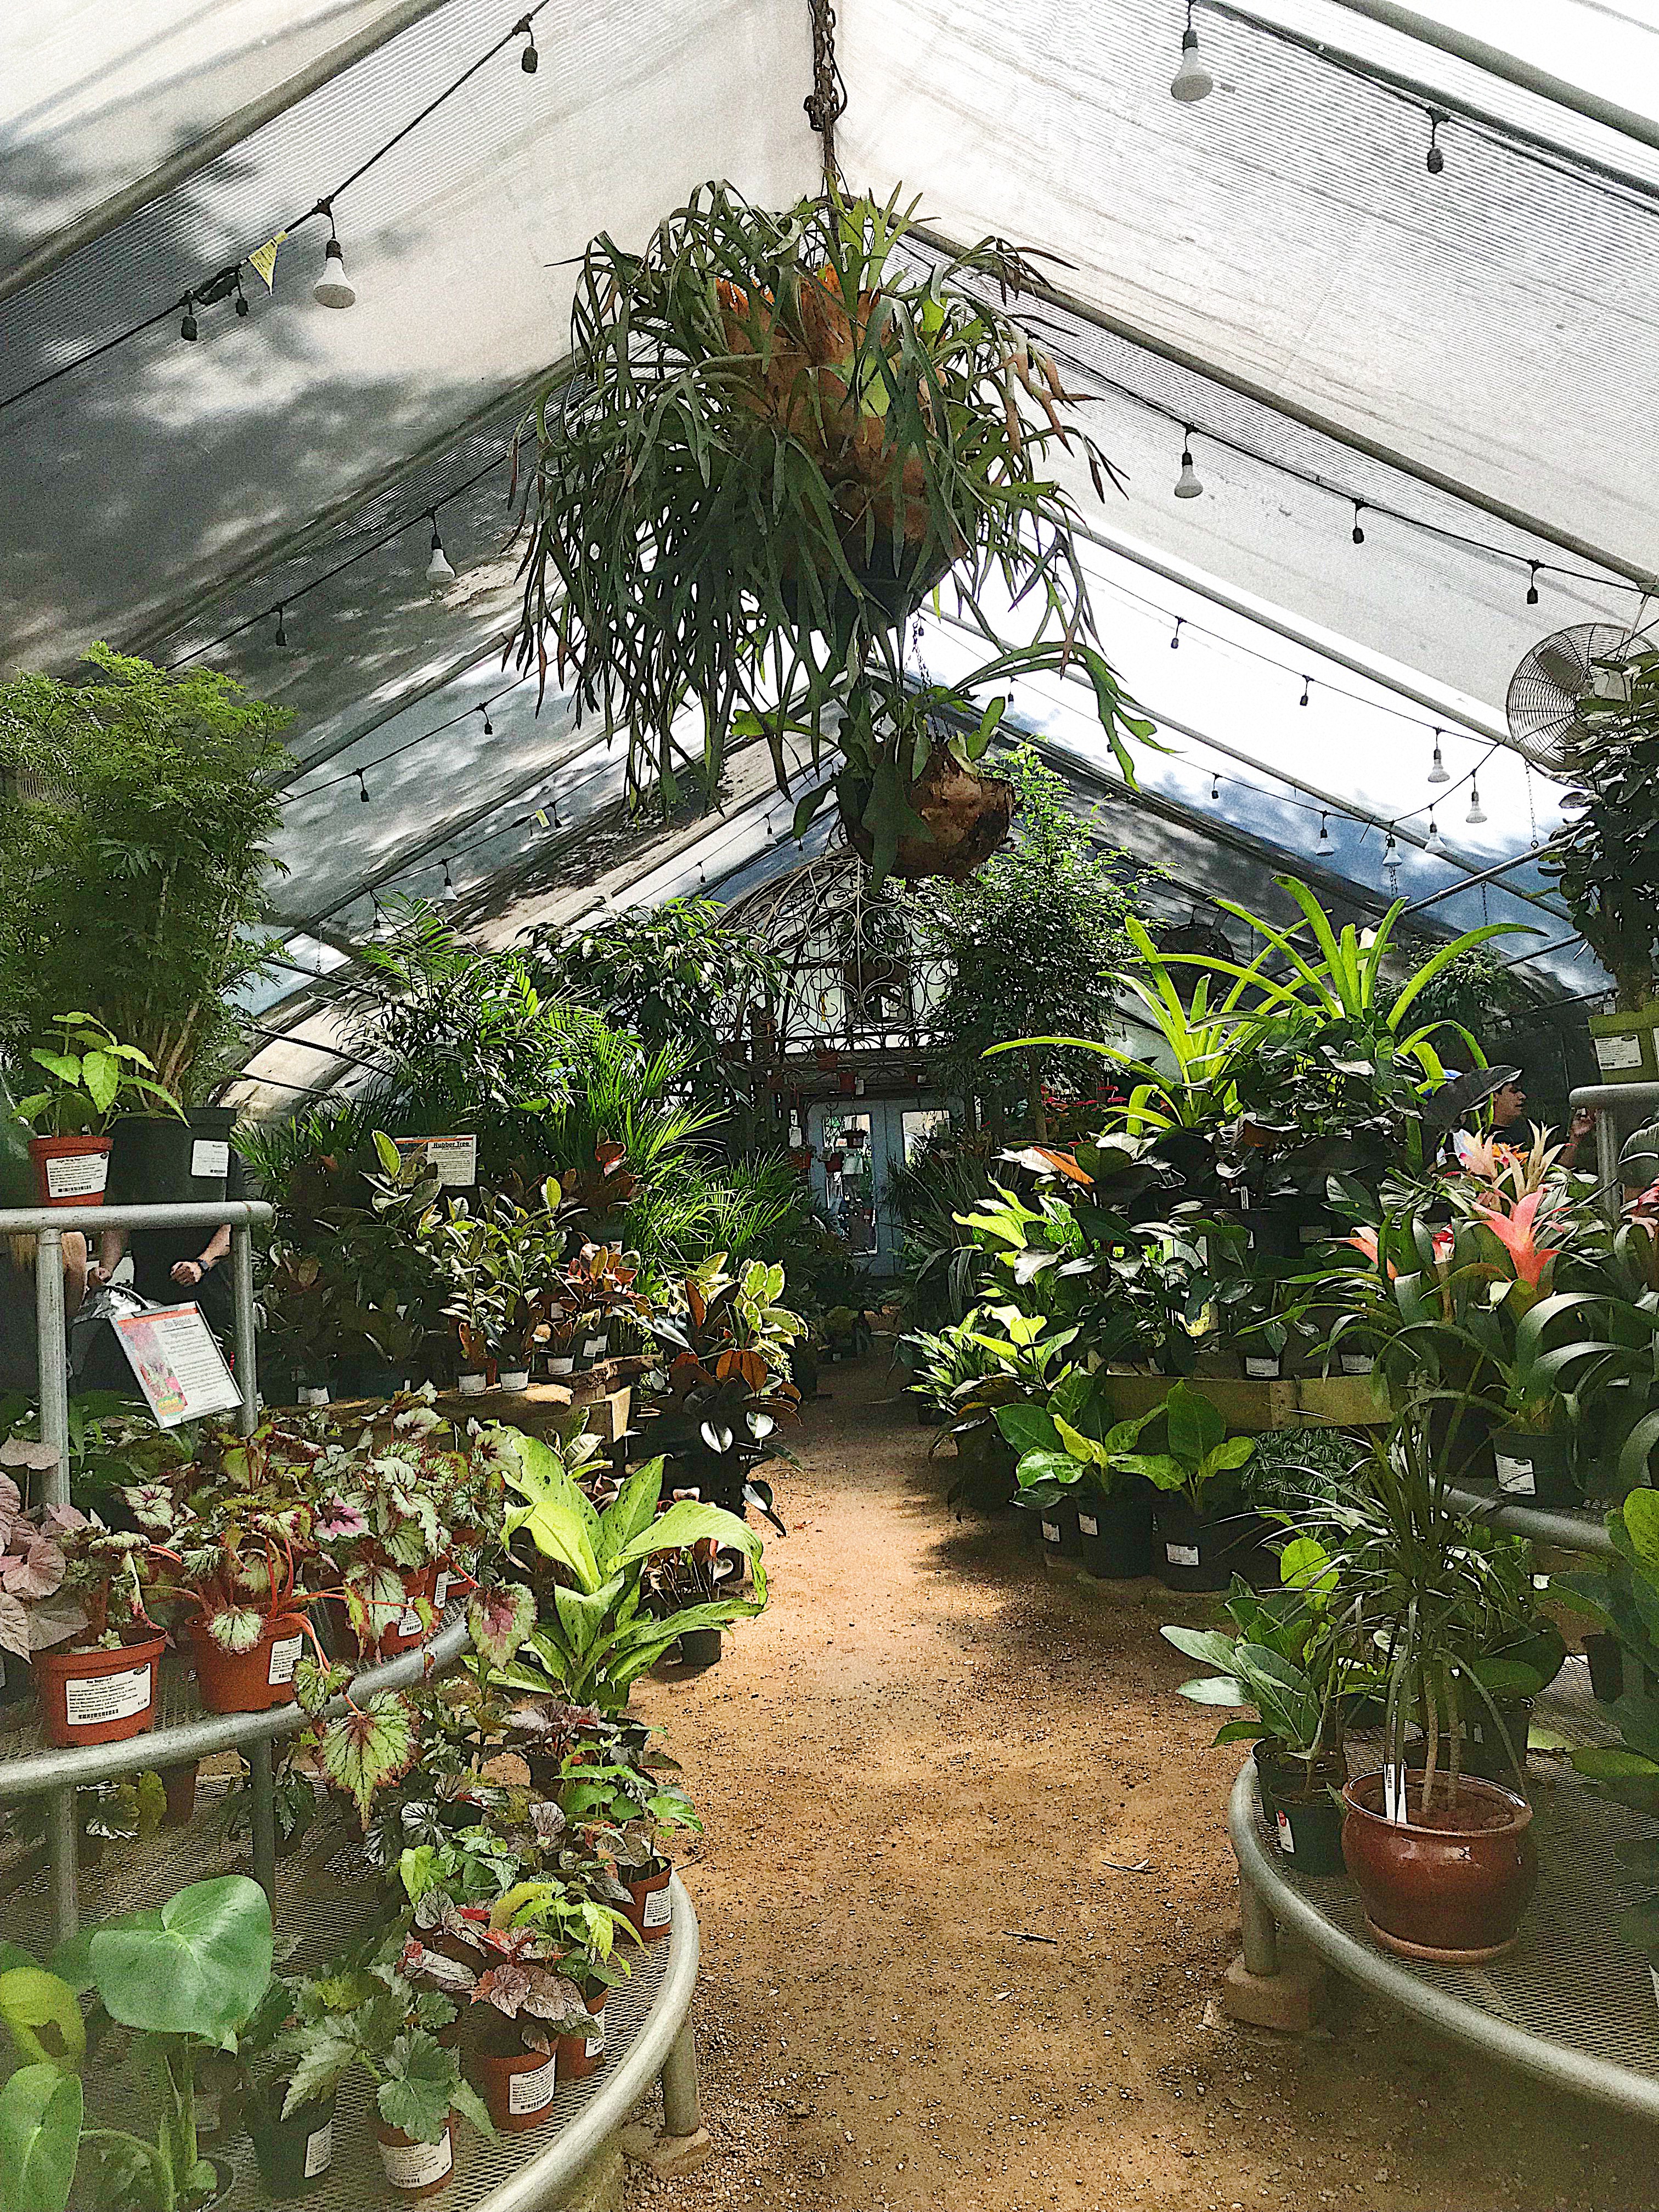 A lush greenhouse containing tons of displays of houseplants.